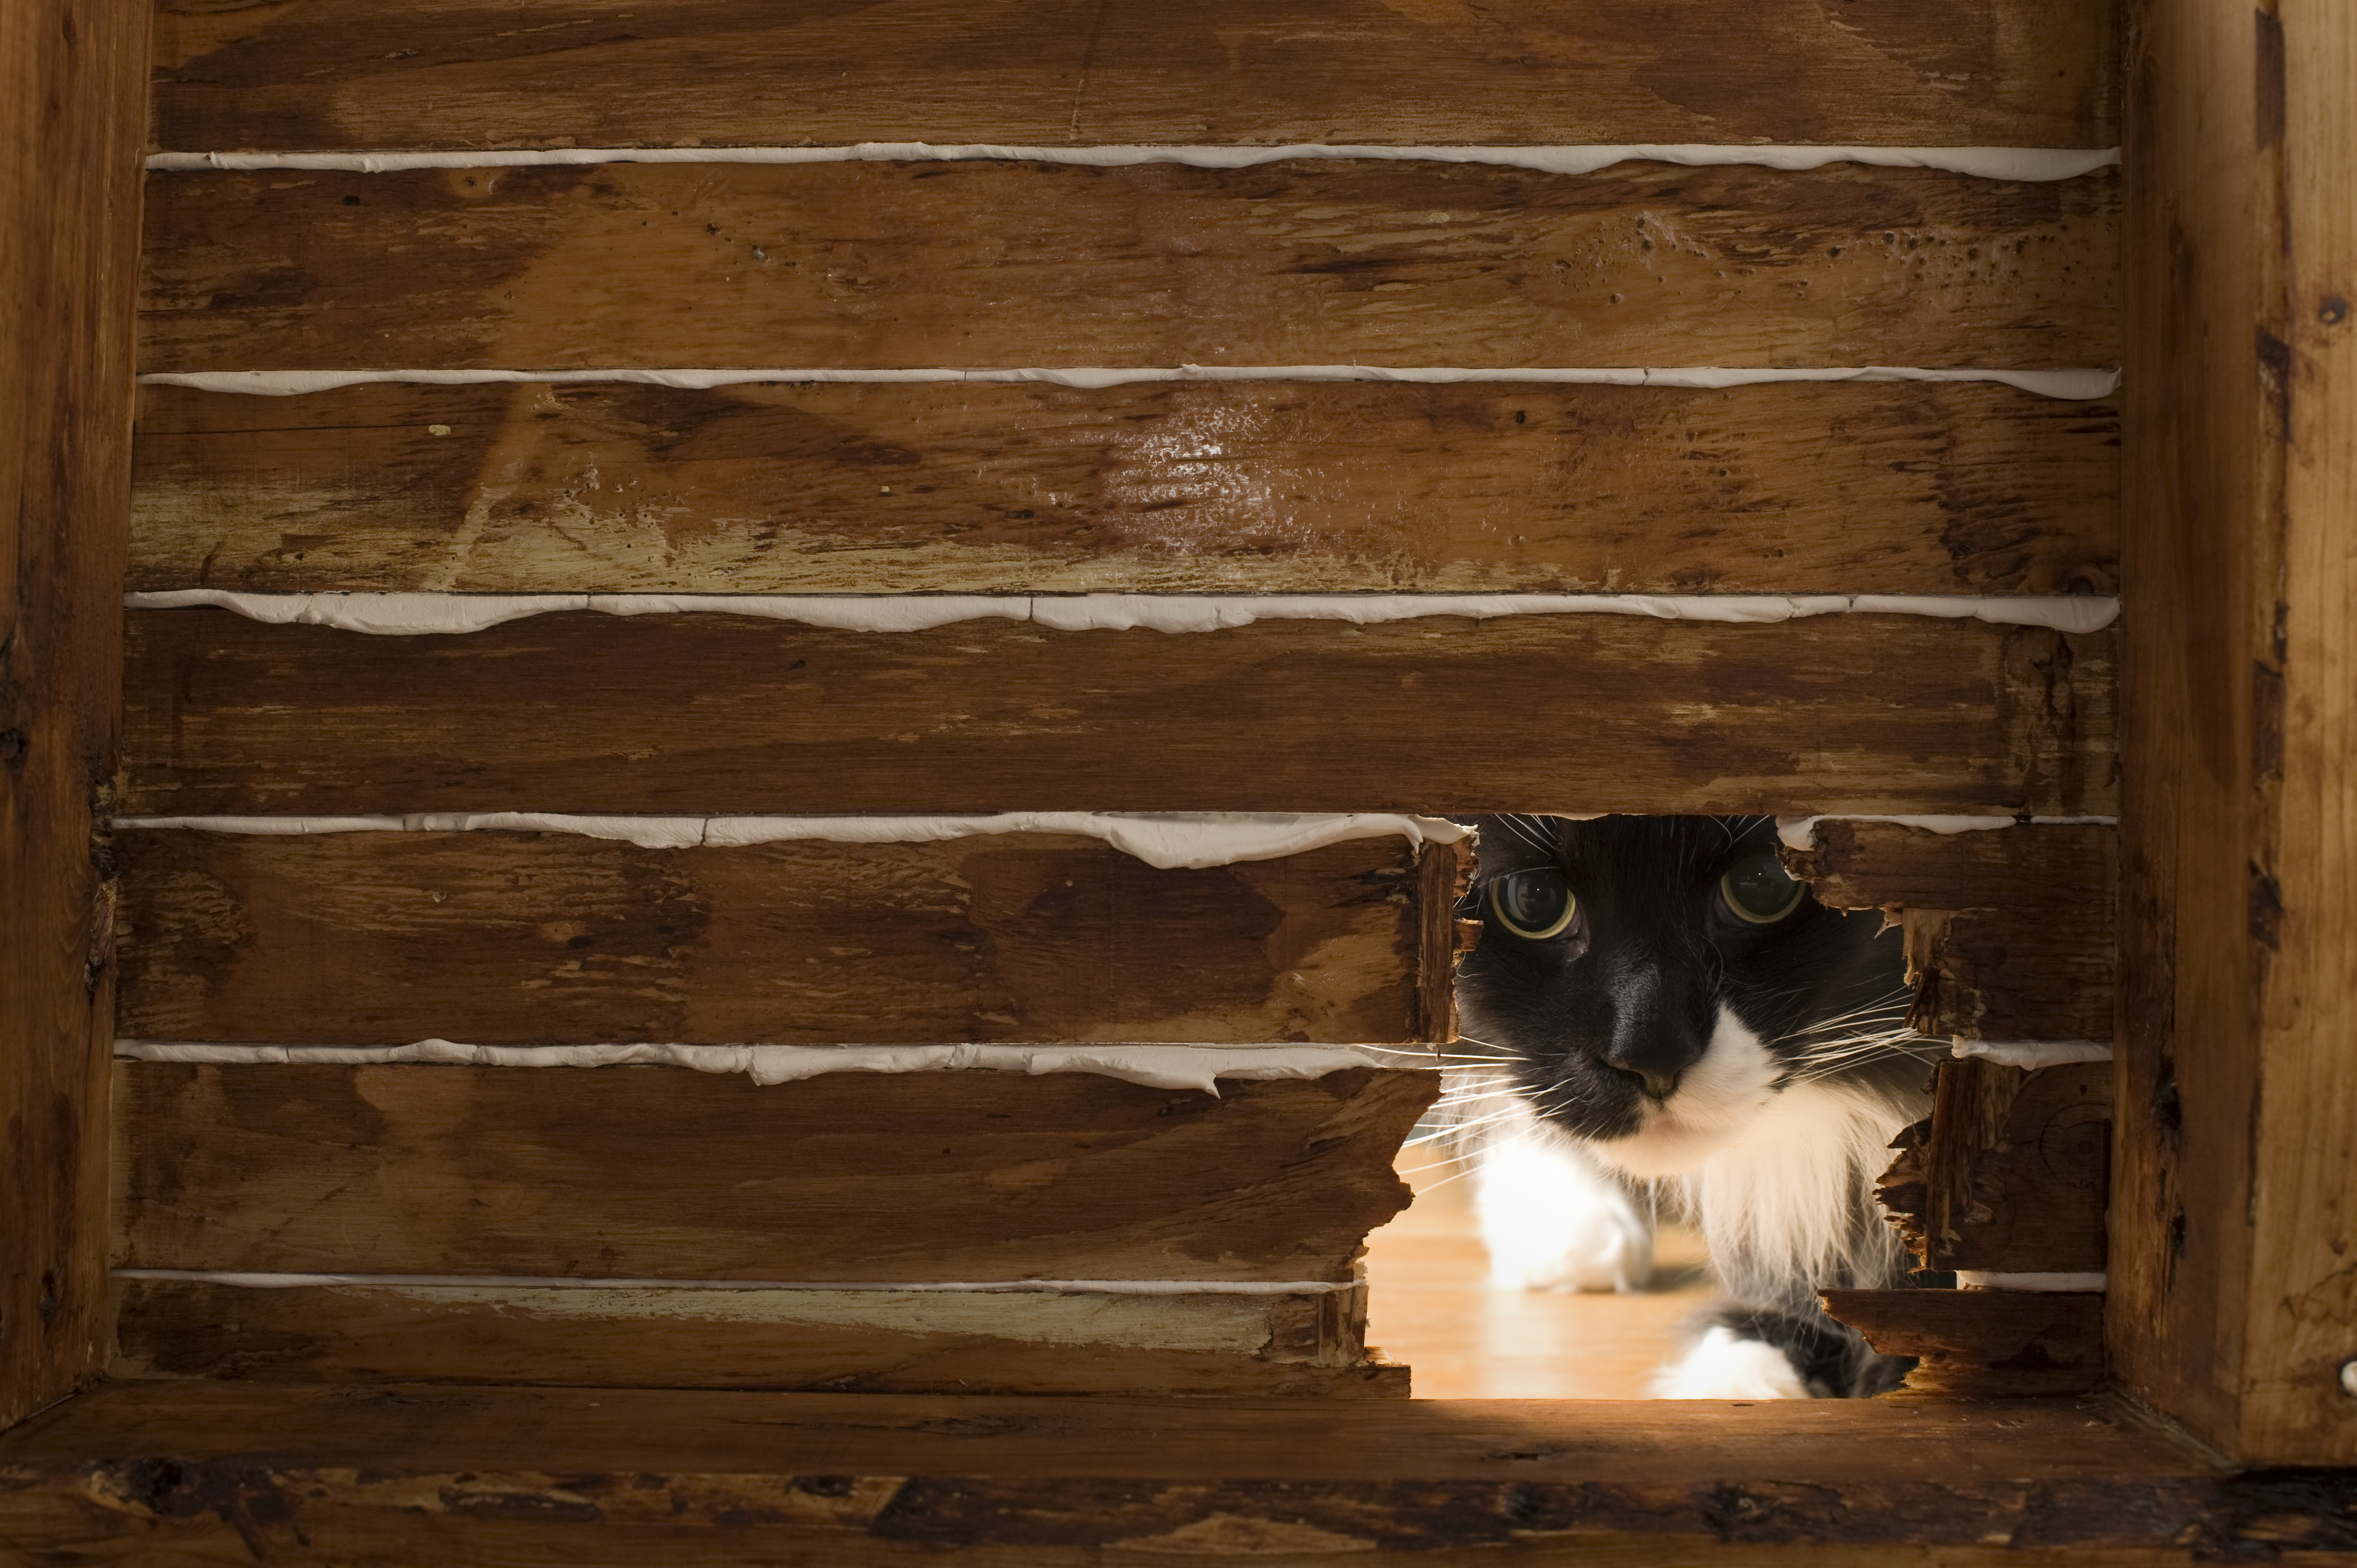 A cat peeking through a hole in a wooden door | Source: Getty Images